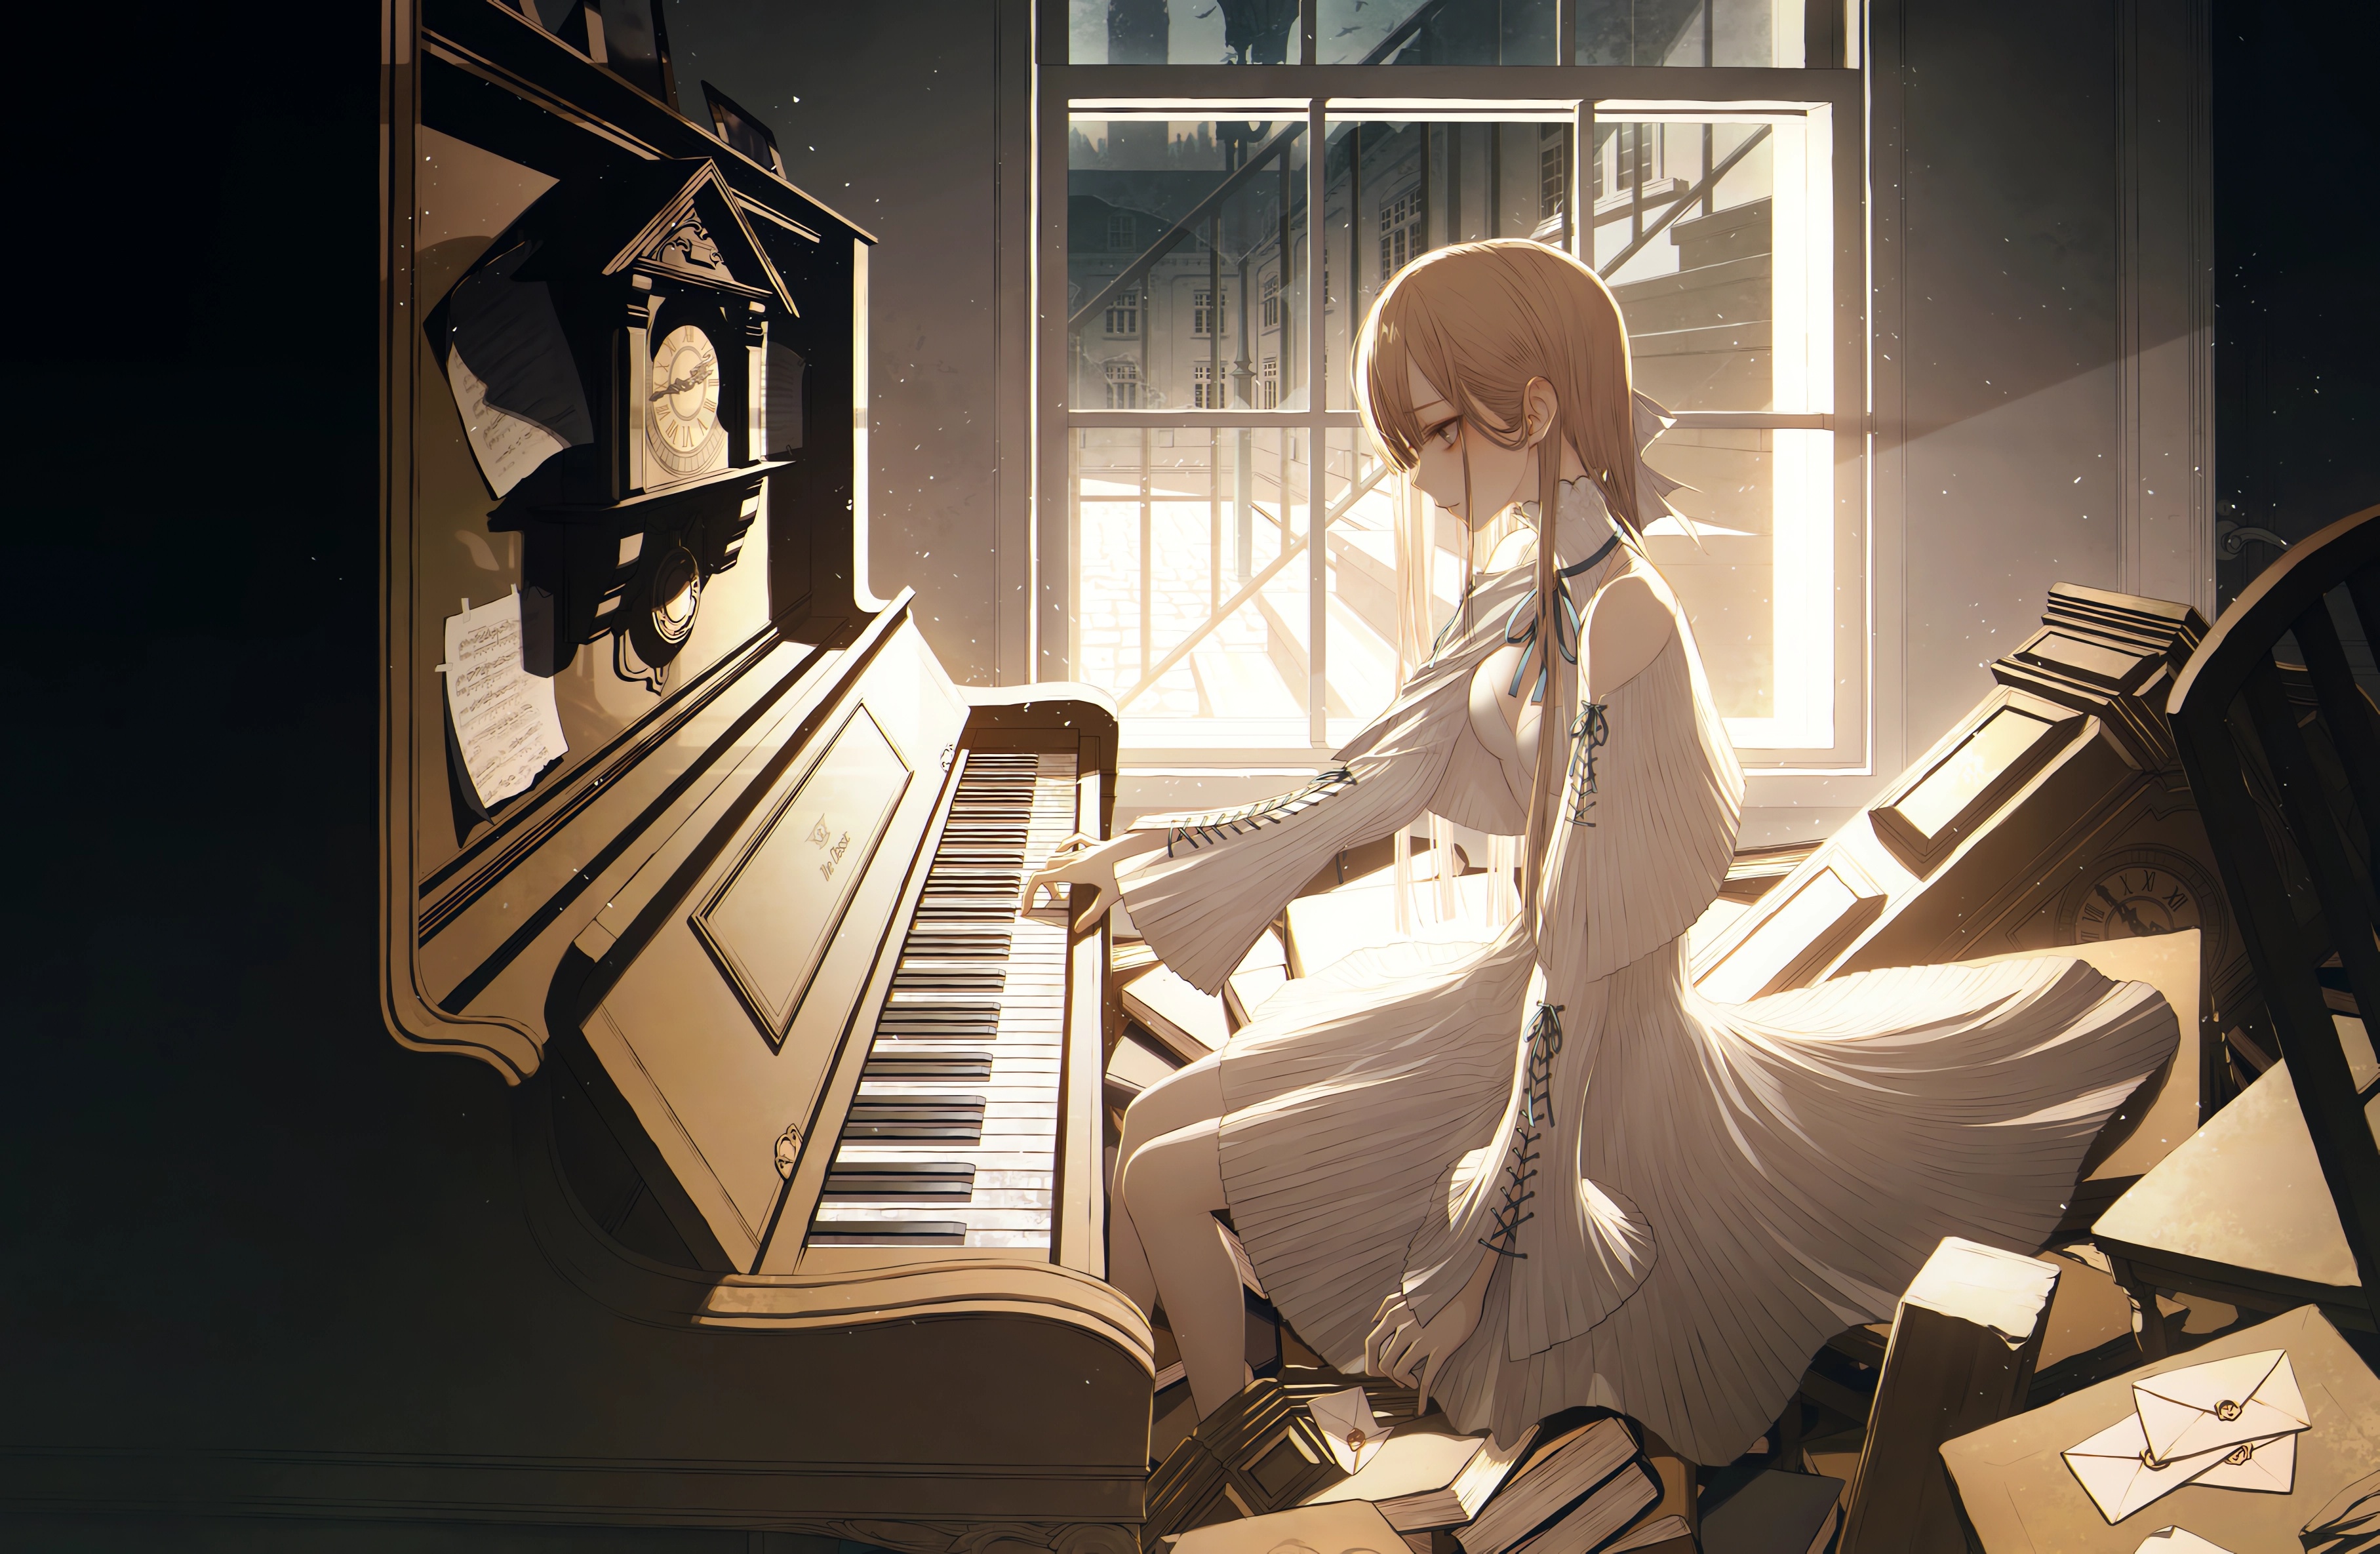 Anime 3630x2370 anime anime girls Pixiv original characters musical instrument piano sitting dress frills letter books paper window sunlight clocks long hair blonde blue eyes smiling stairs indoors women indoors cleavage